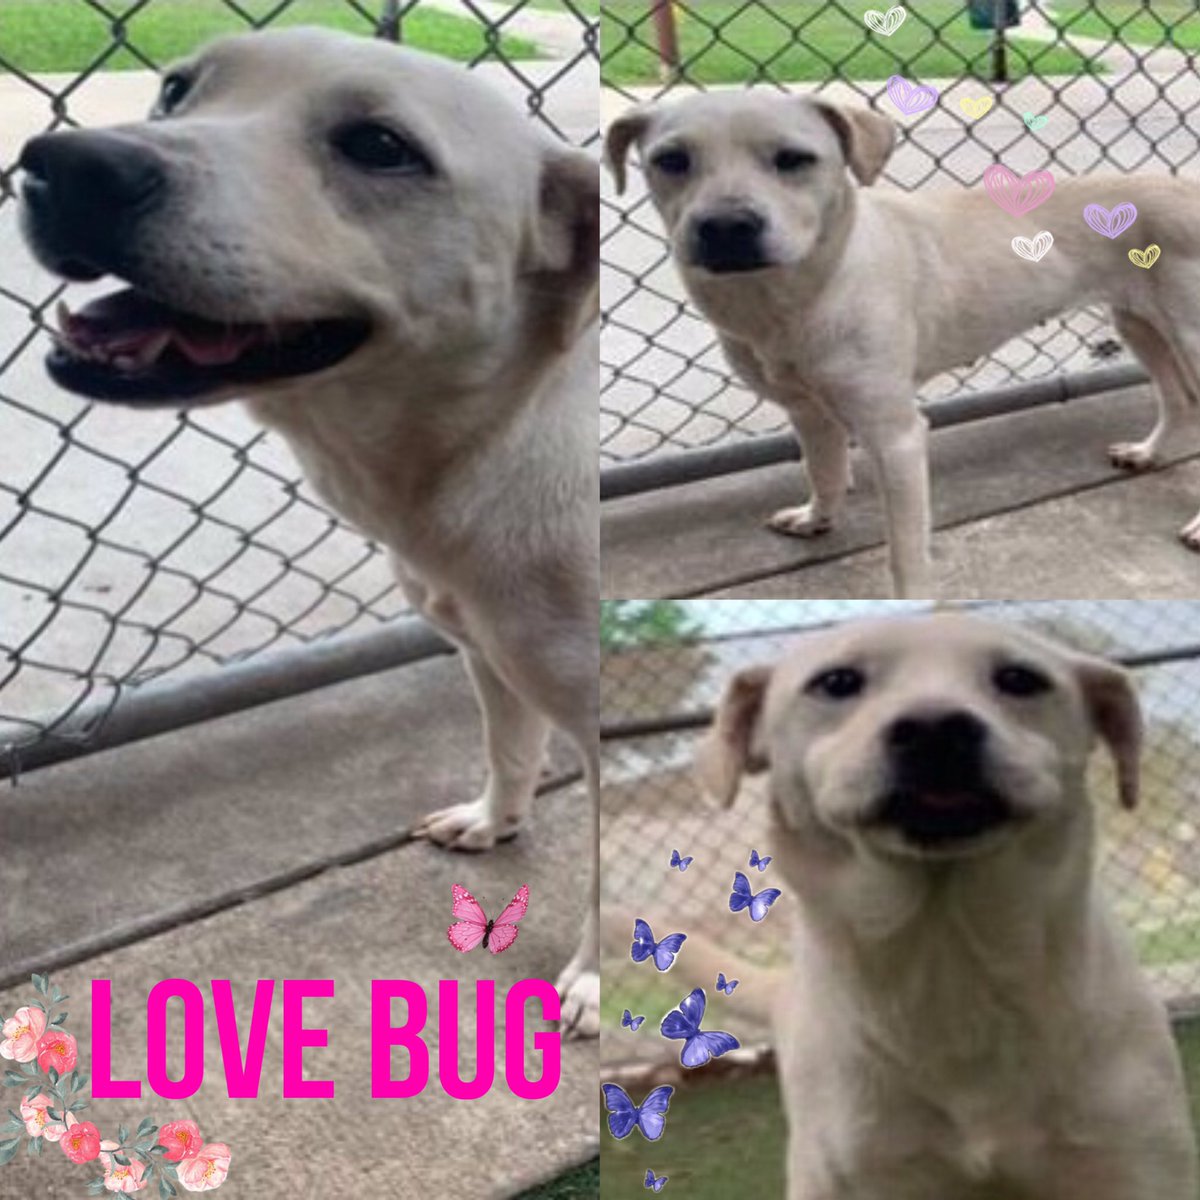 🆘 SWEETEST DOG LOVE BUG #A713336 (2yo F, 33lb) WHO WANTS TO HUG🥰 EVERYONE IS TBK TODAY 5.20 BY SA ACS #TEXAS‼️ 🏳owner surrender In play-yard she was scared of other dogs, screamed & run in a corner🥺! She’s sweetness personified❤️‍🔥All she wants is to get pets💘 ☎️2102074738